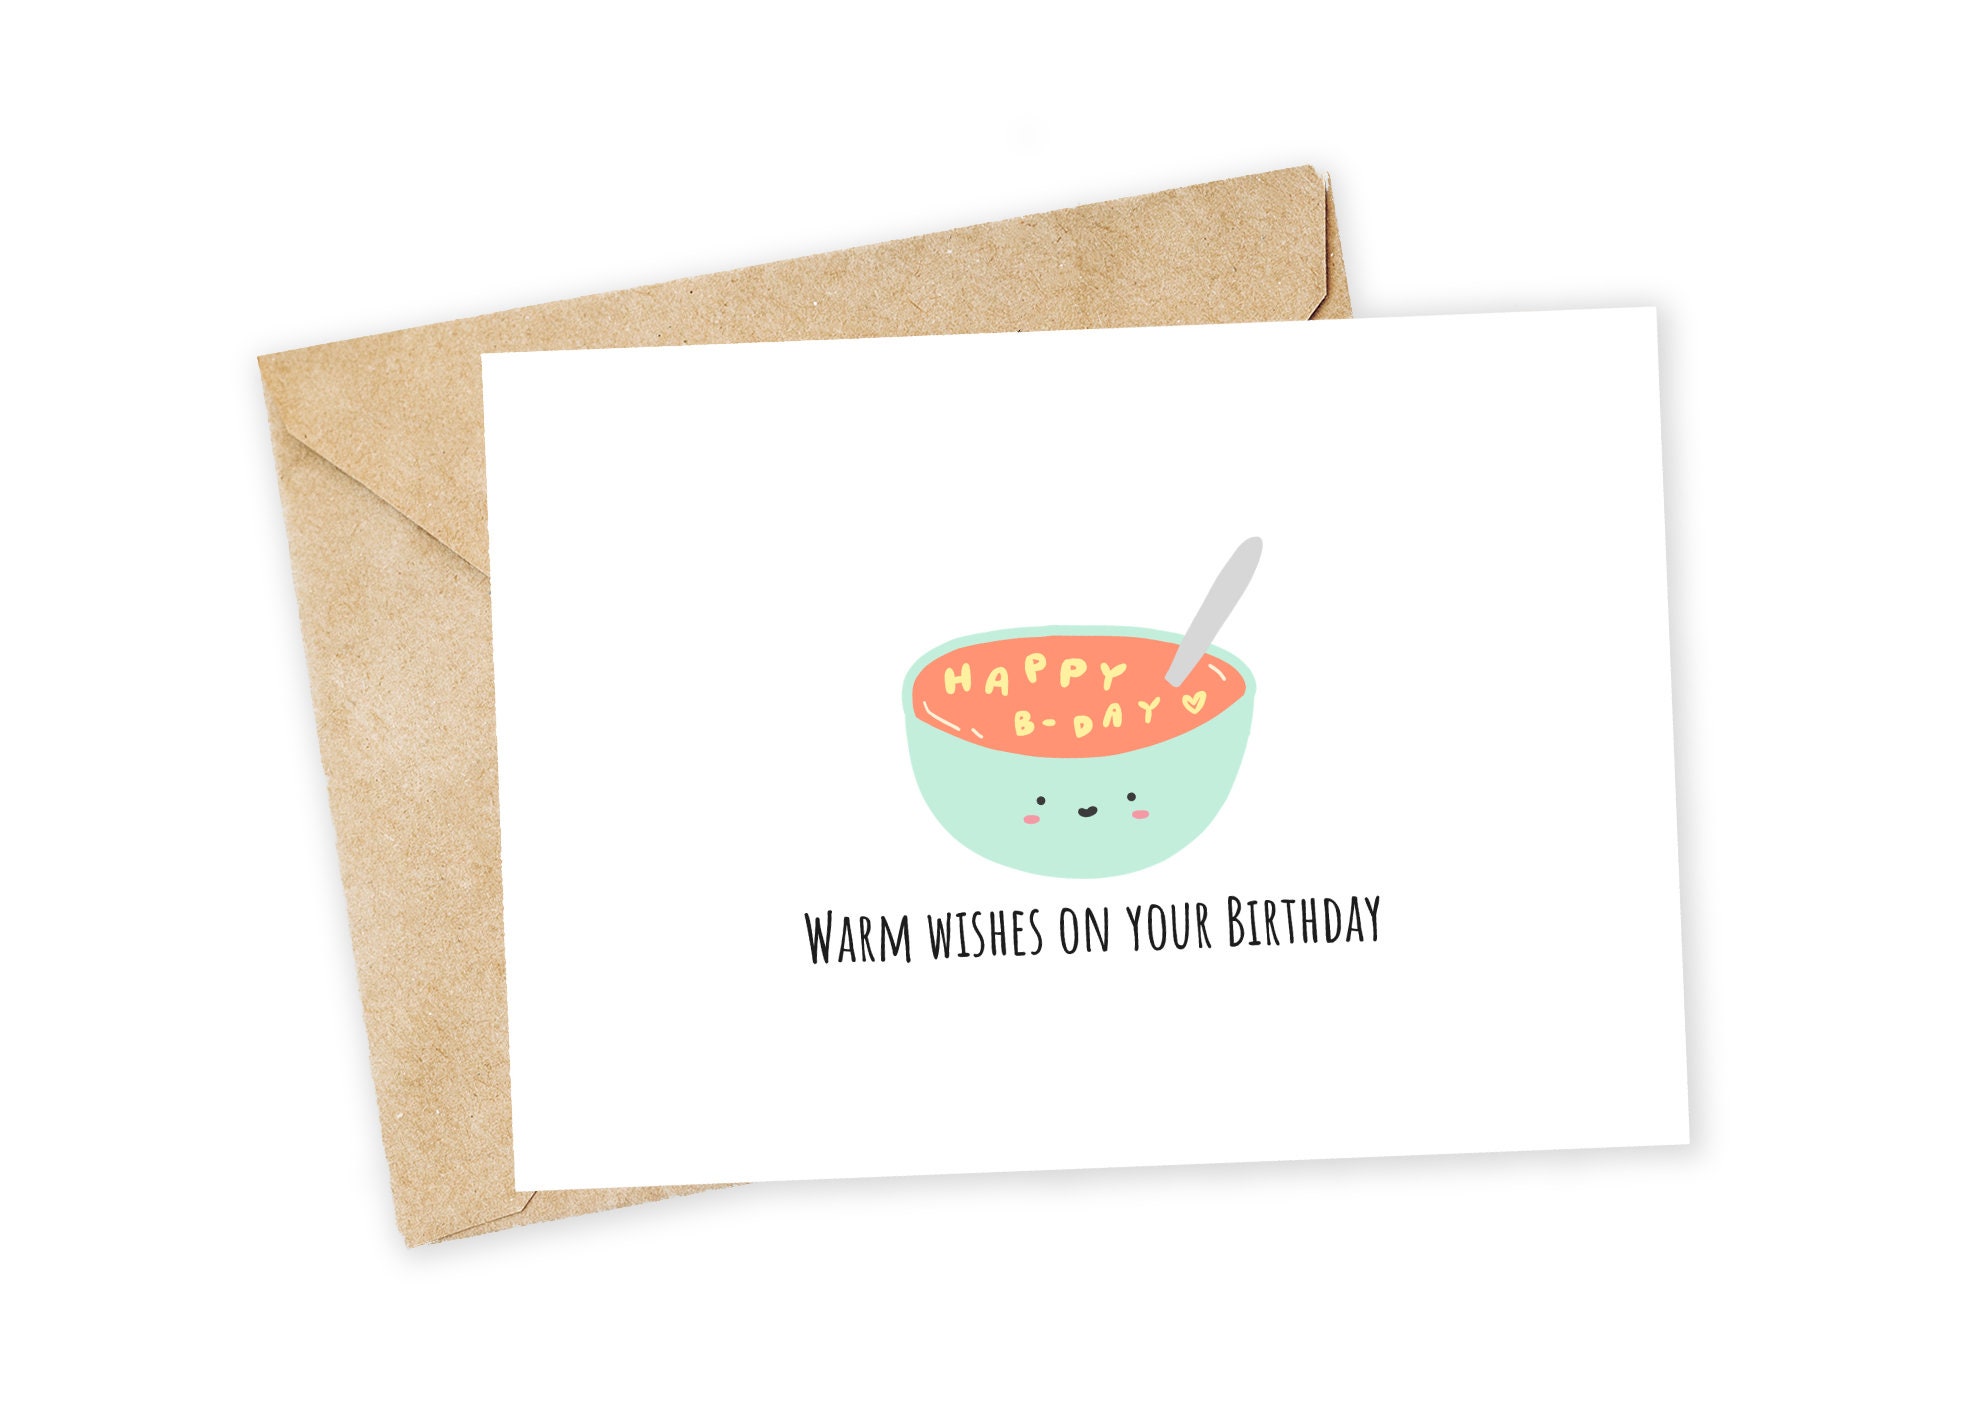 Warm Wishes On Your Birthday - Soup Greeting Card, Love Friend Birthday, Bday Card, Alphabet Soup, Spaghettio, Tomato Soup Card